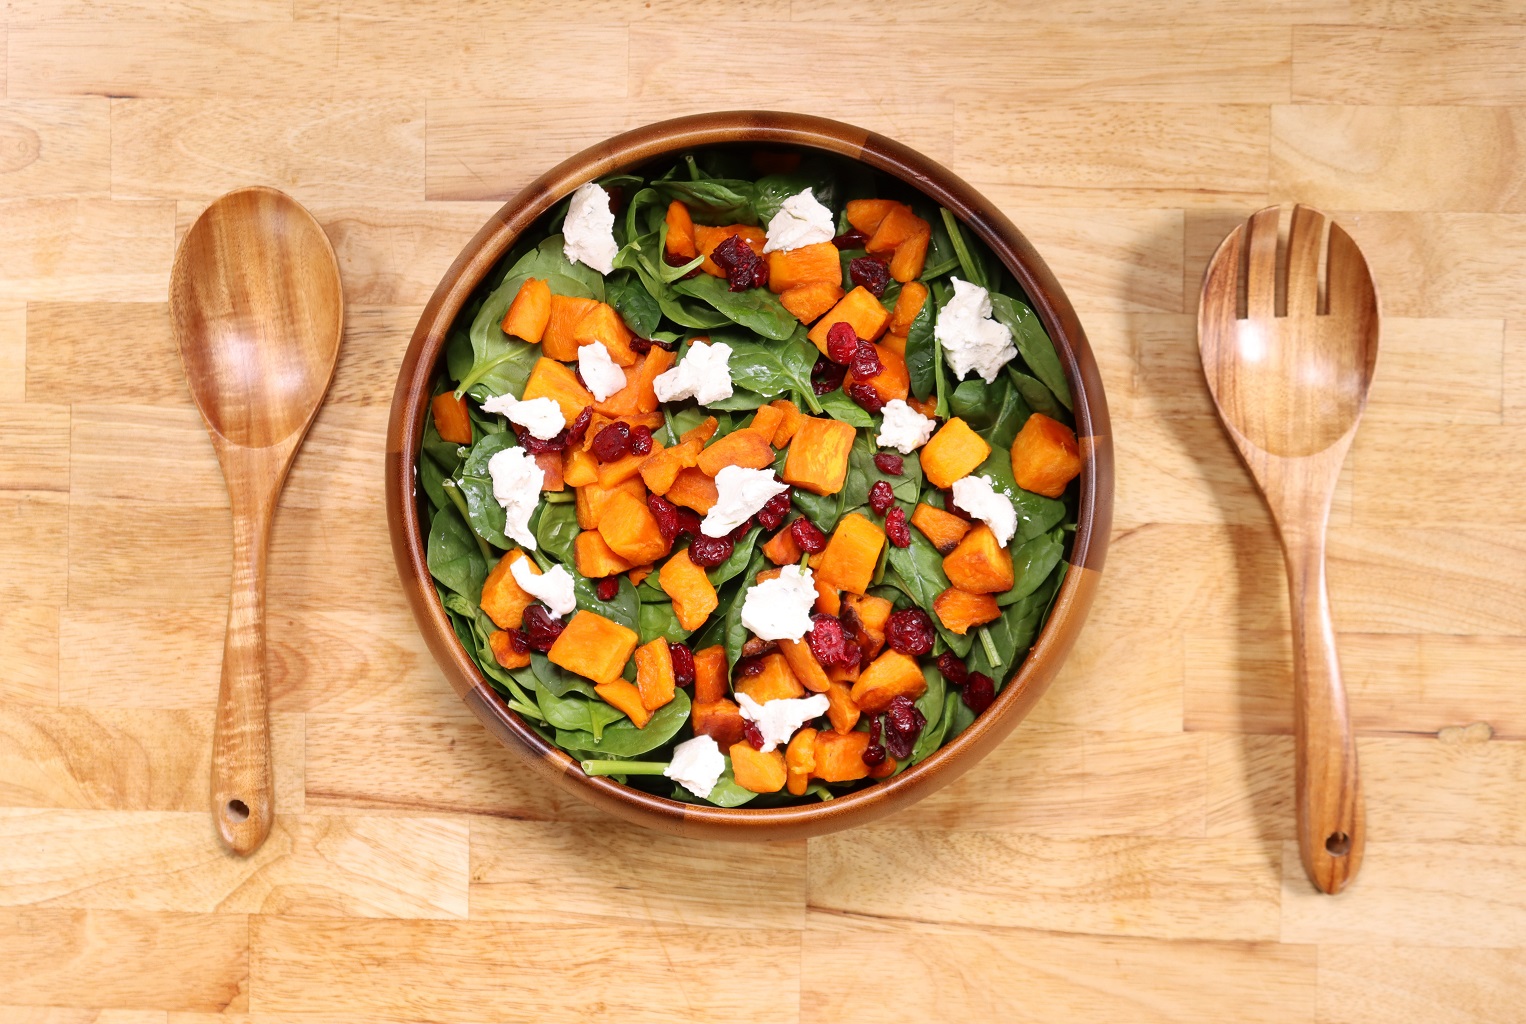 Sweet Potato and Spinach Salad pic